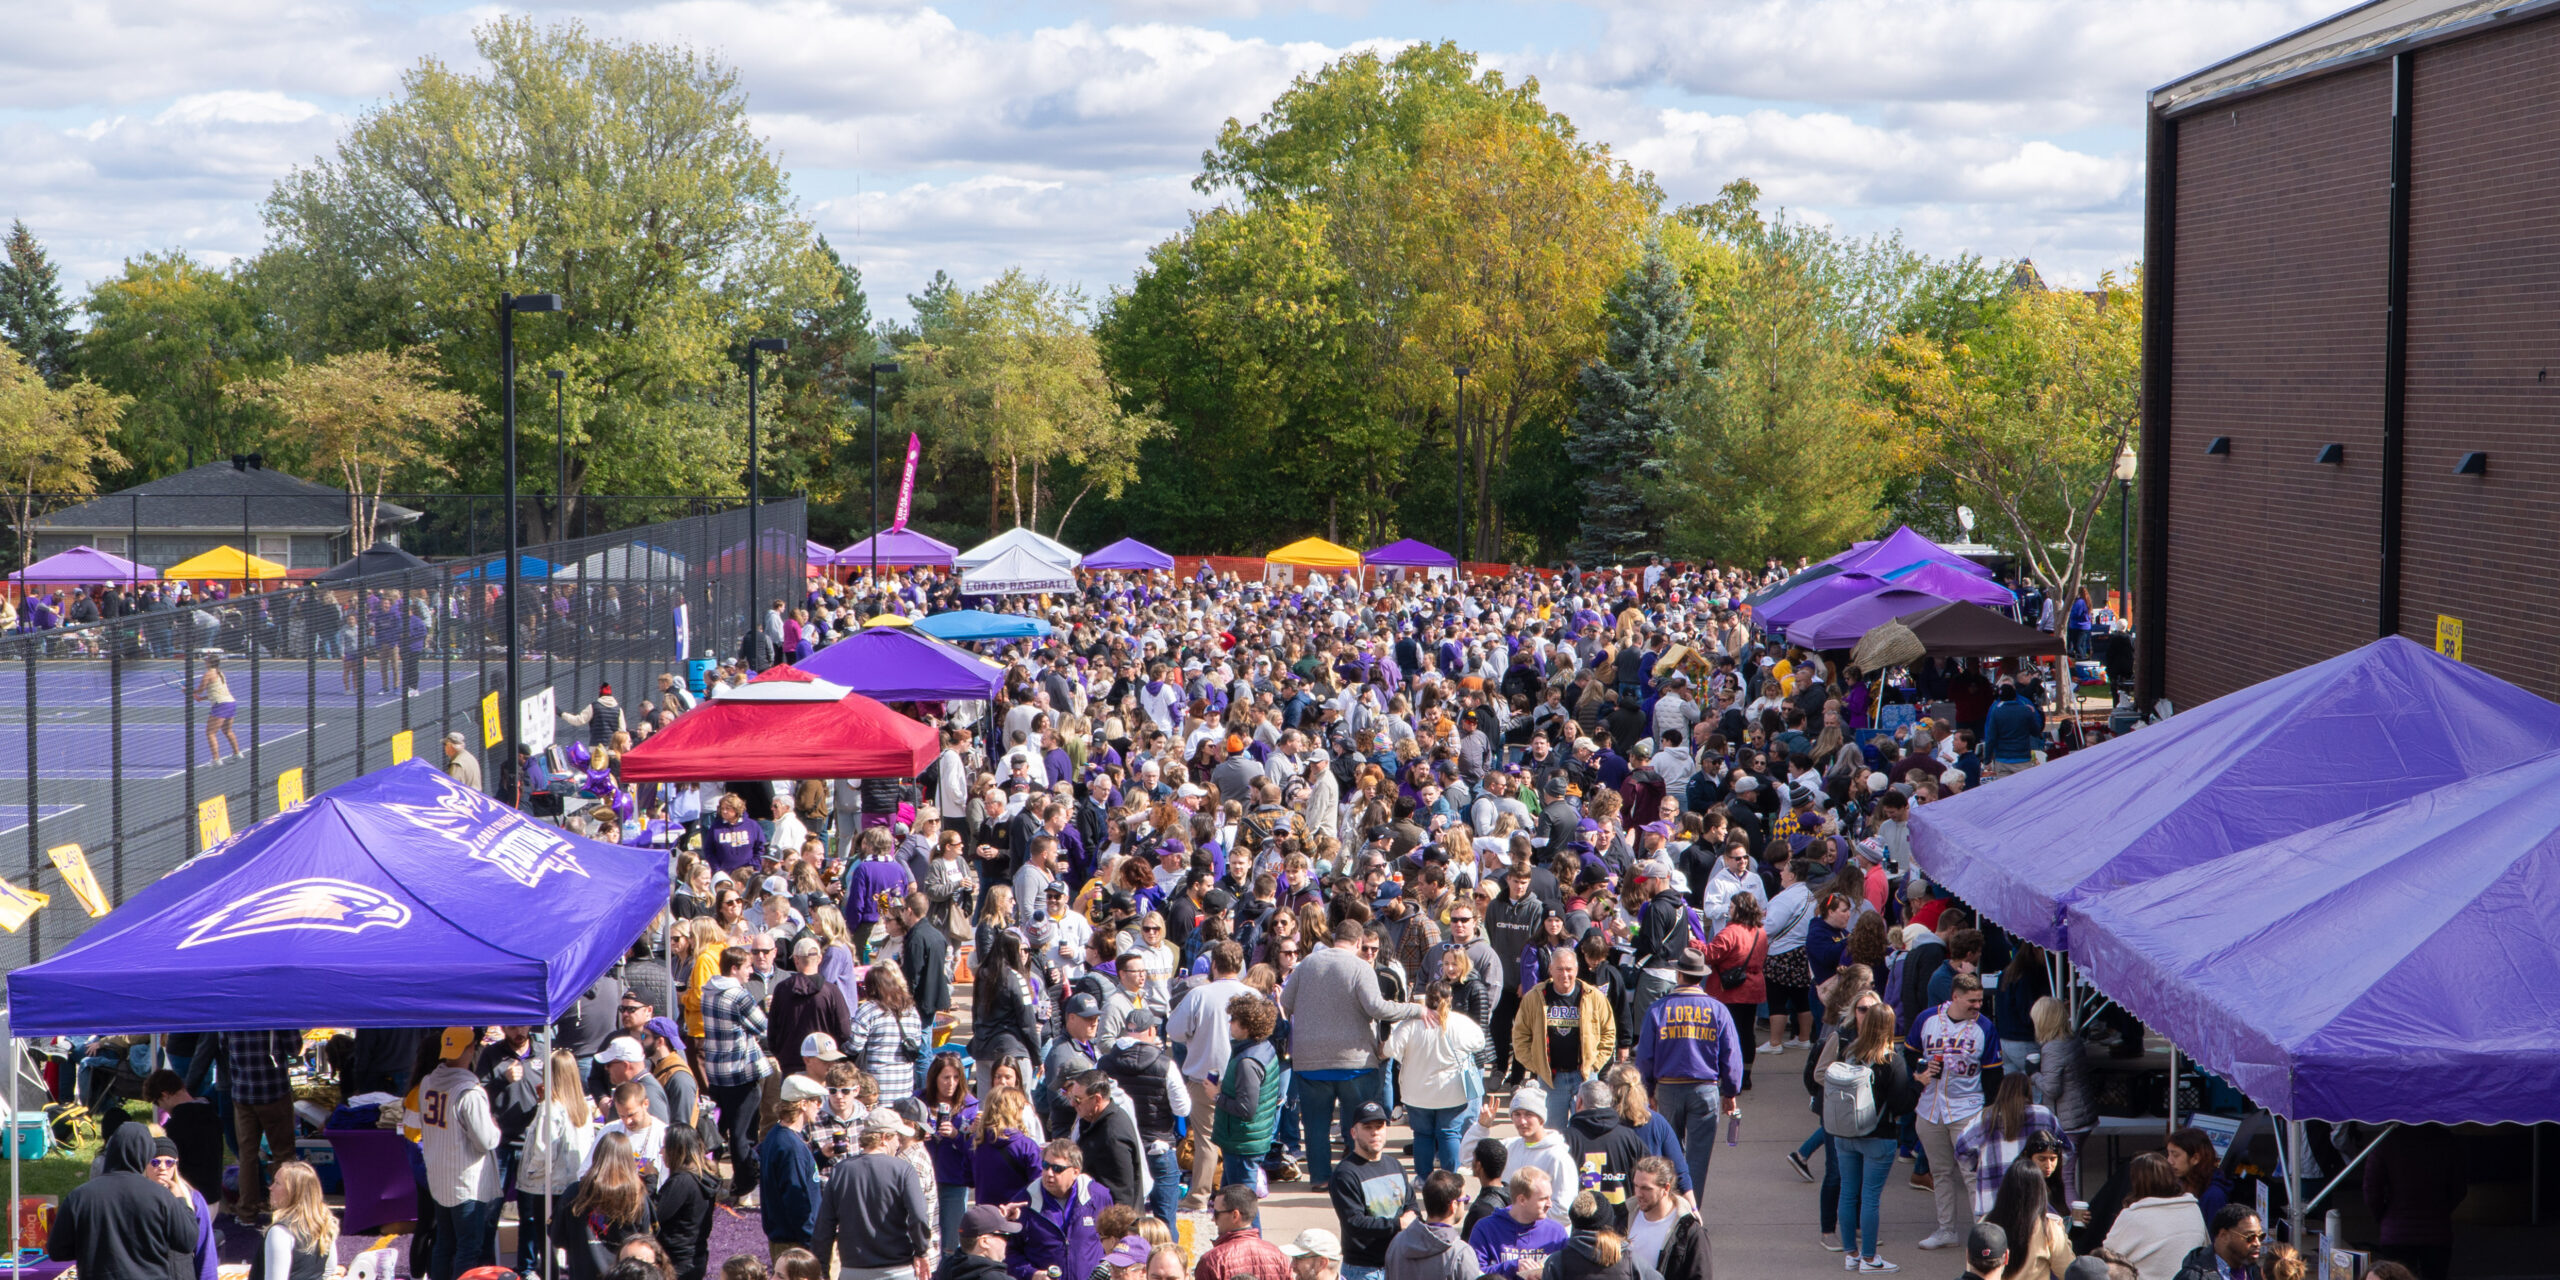 Loras Homecoming Tailgate with hundreds of alumni and friends on beautiful fall day